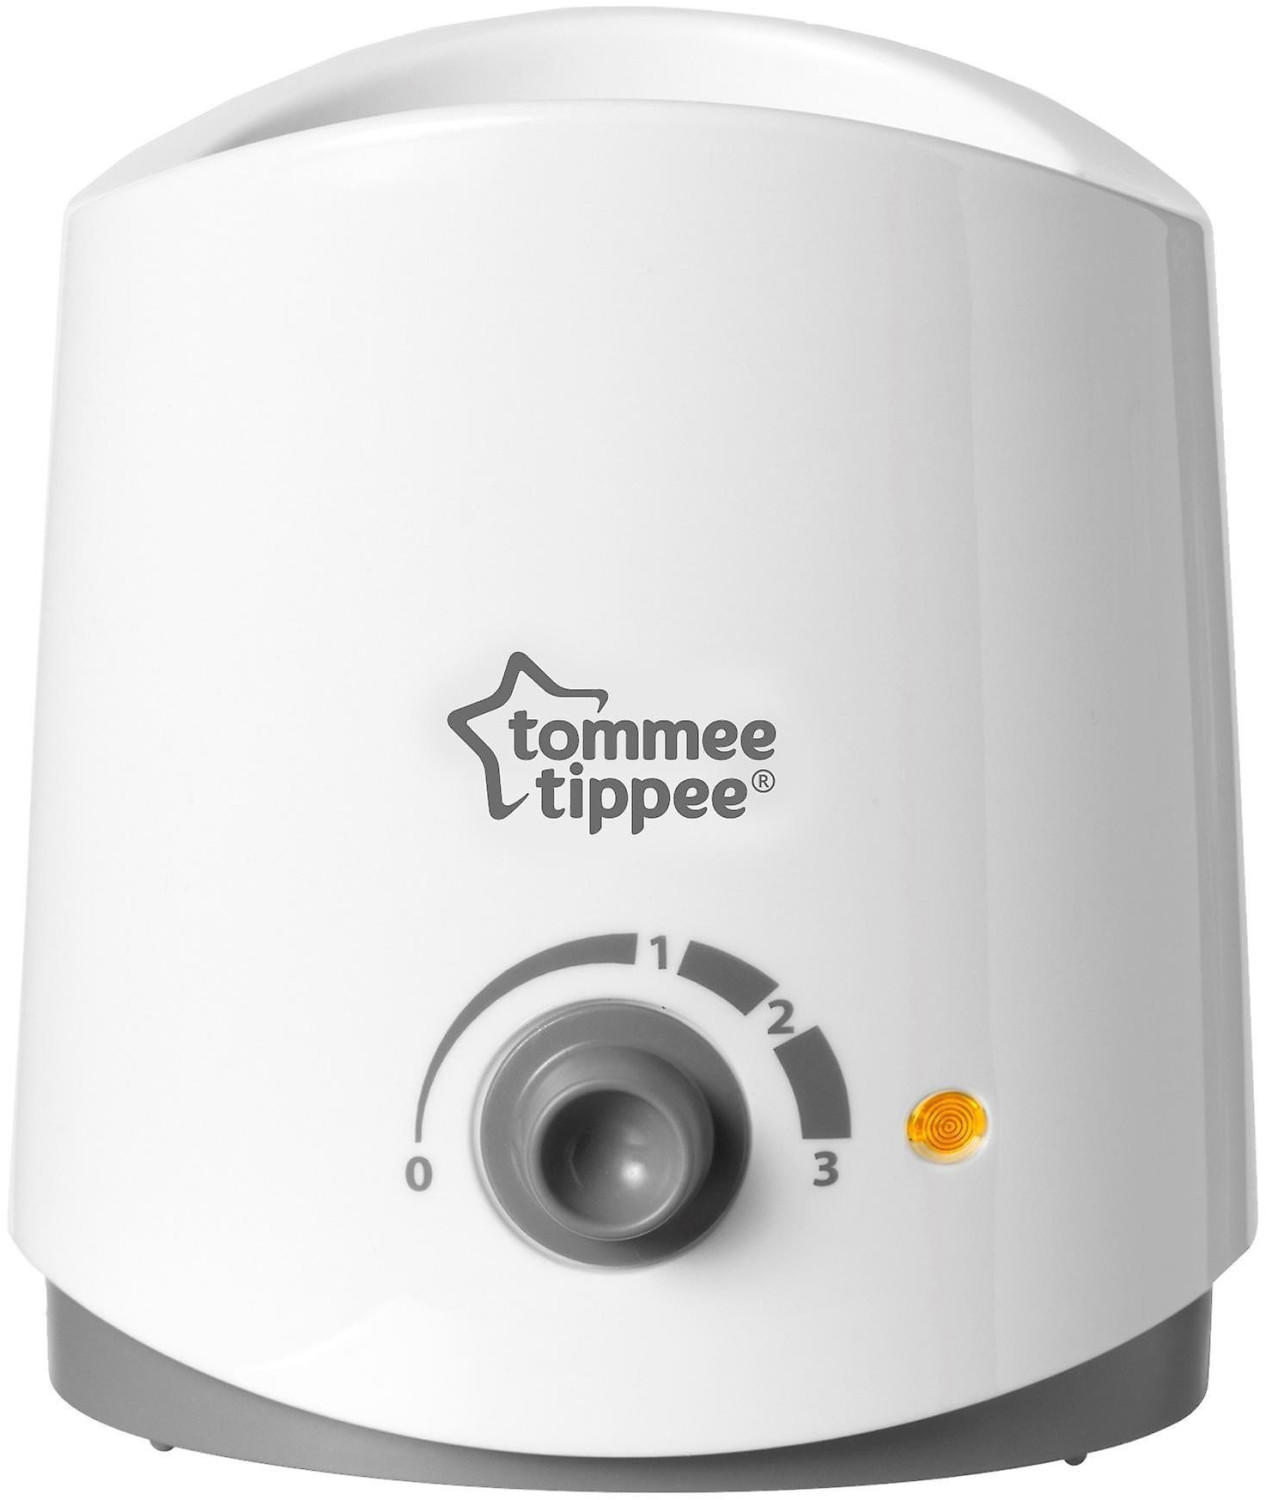 Tommee Tippee Closer to Nature Bottle and Food Warmer